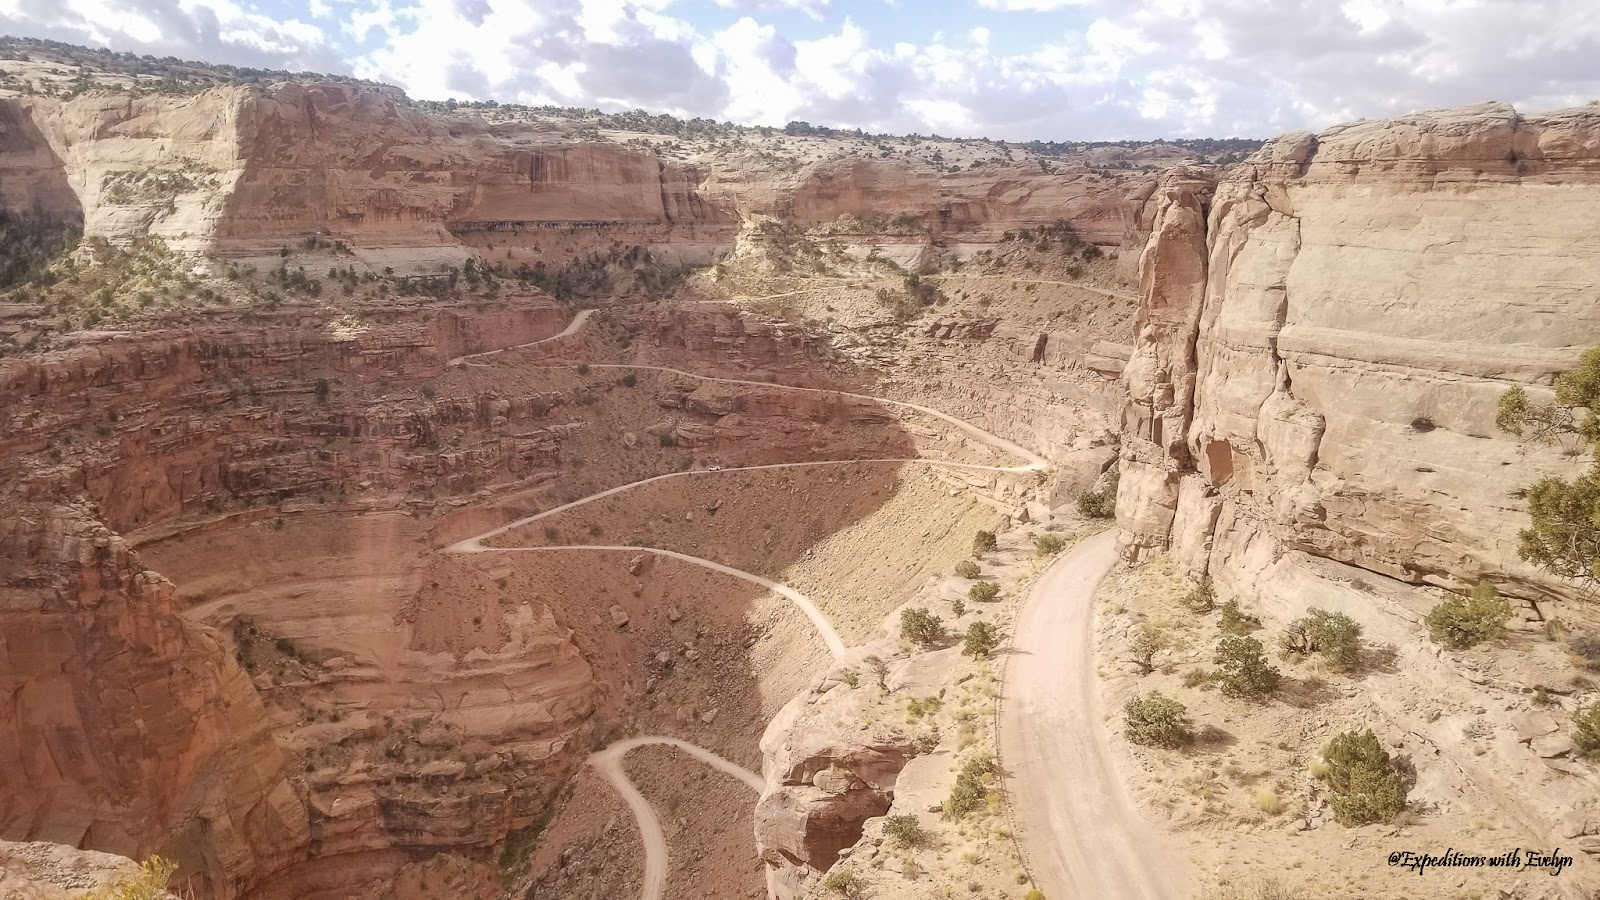 A winding dirt road full of switchbacks descends down into a canyon.  Driving this is on of the most unique things to do in Moab Utah.